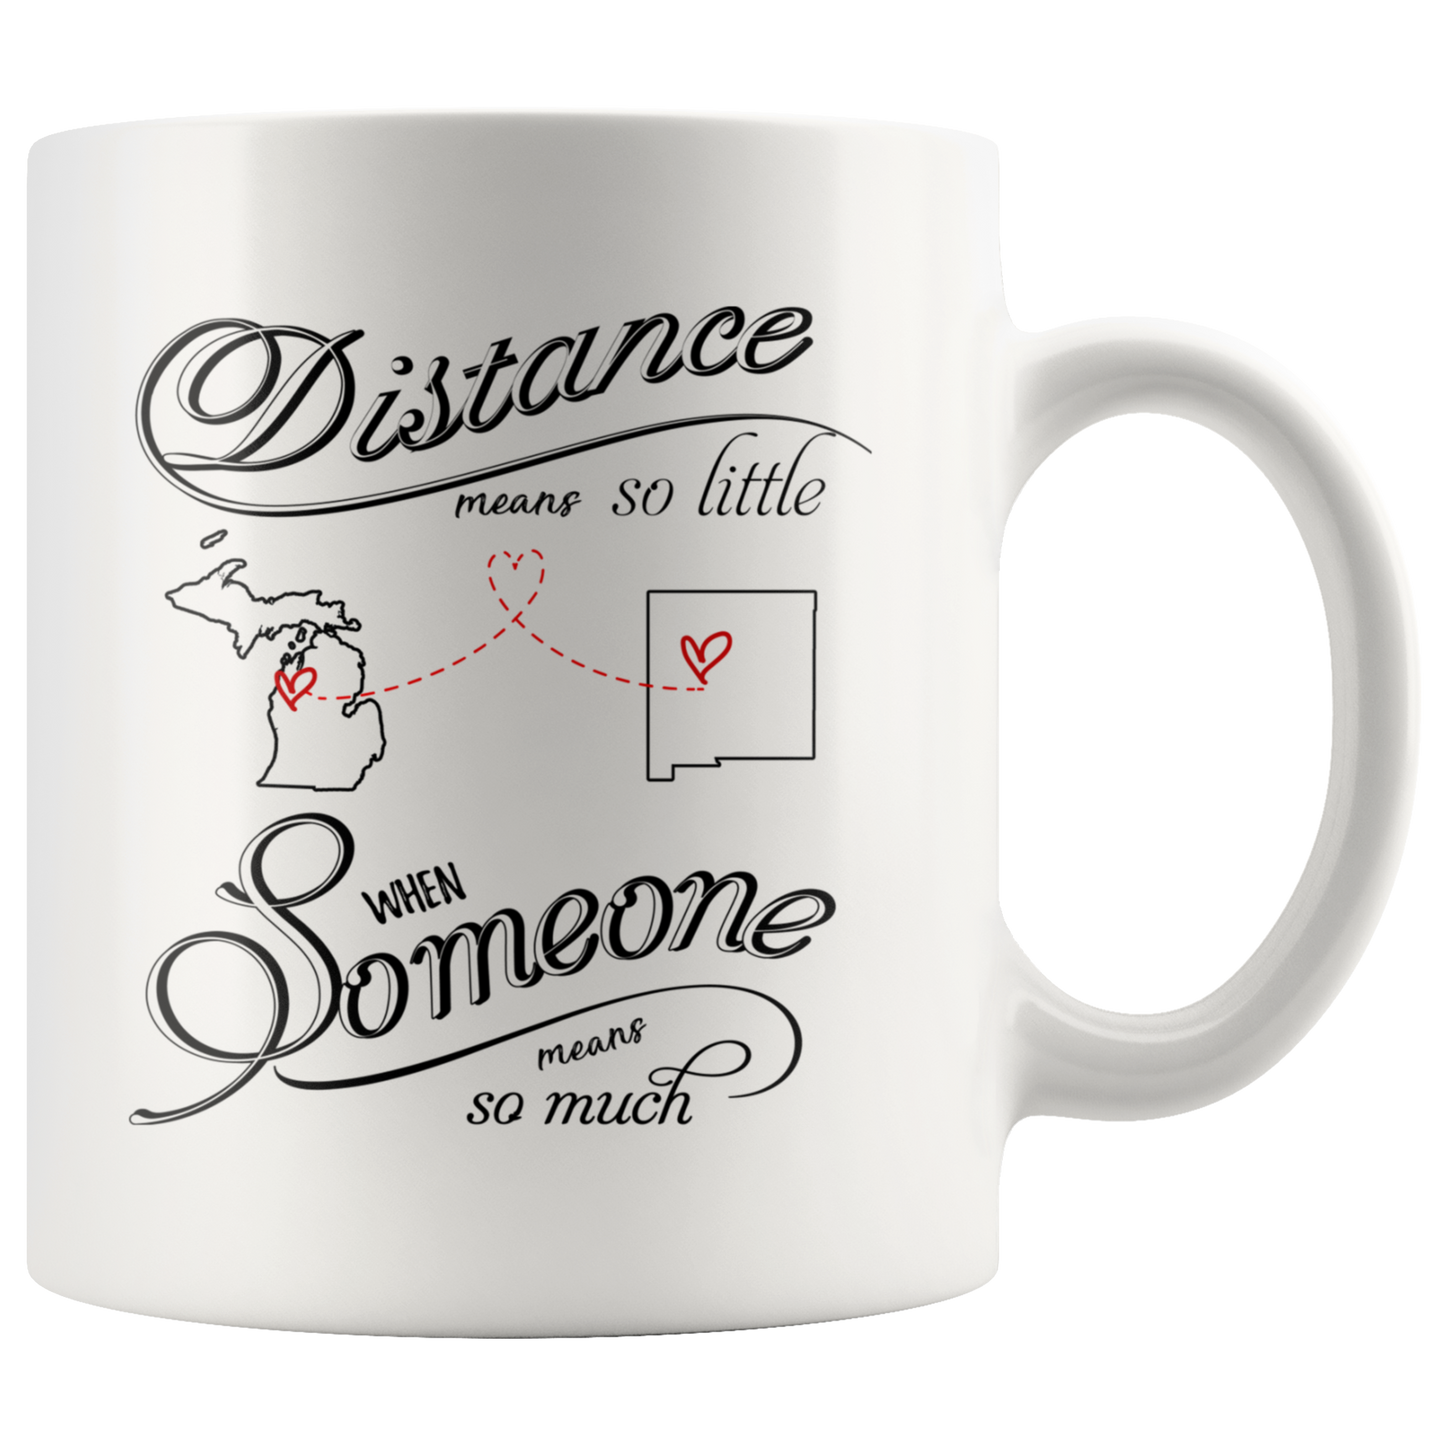 M-20485204-sp-23474 - Mothers Day Coffee Mug Michigan New Mexico Distance Means So